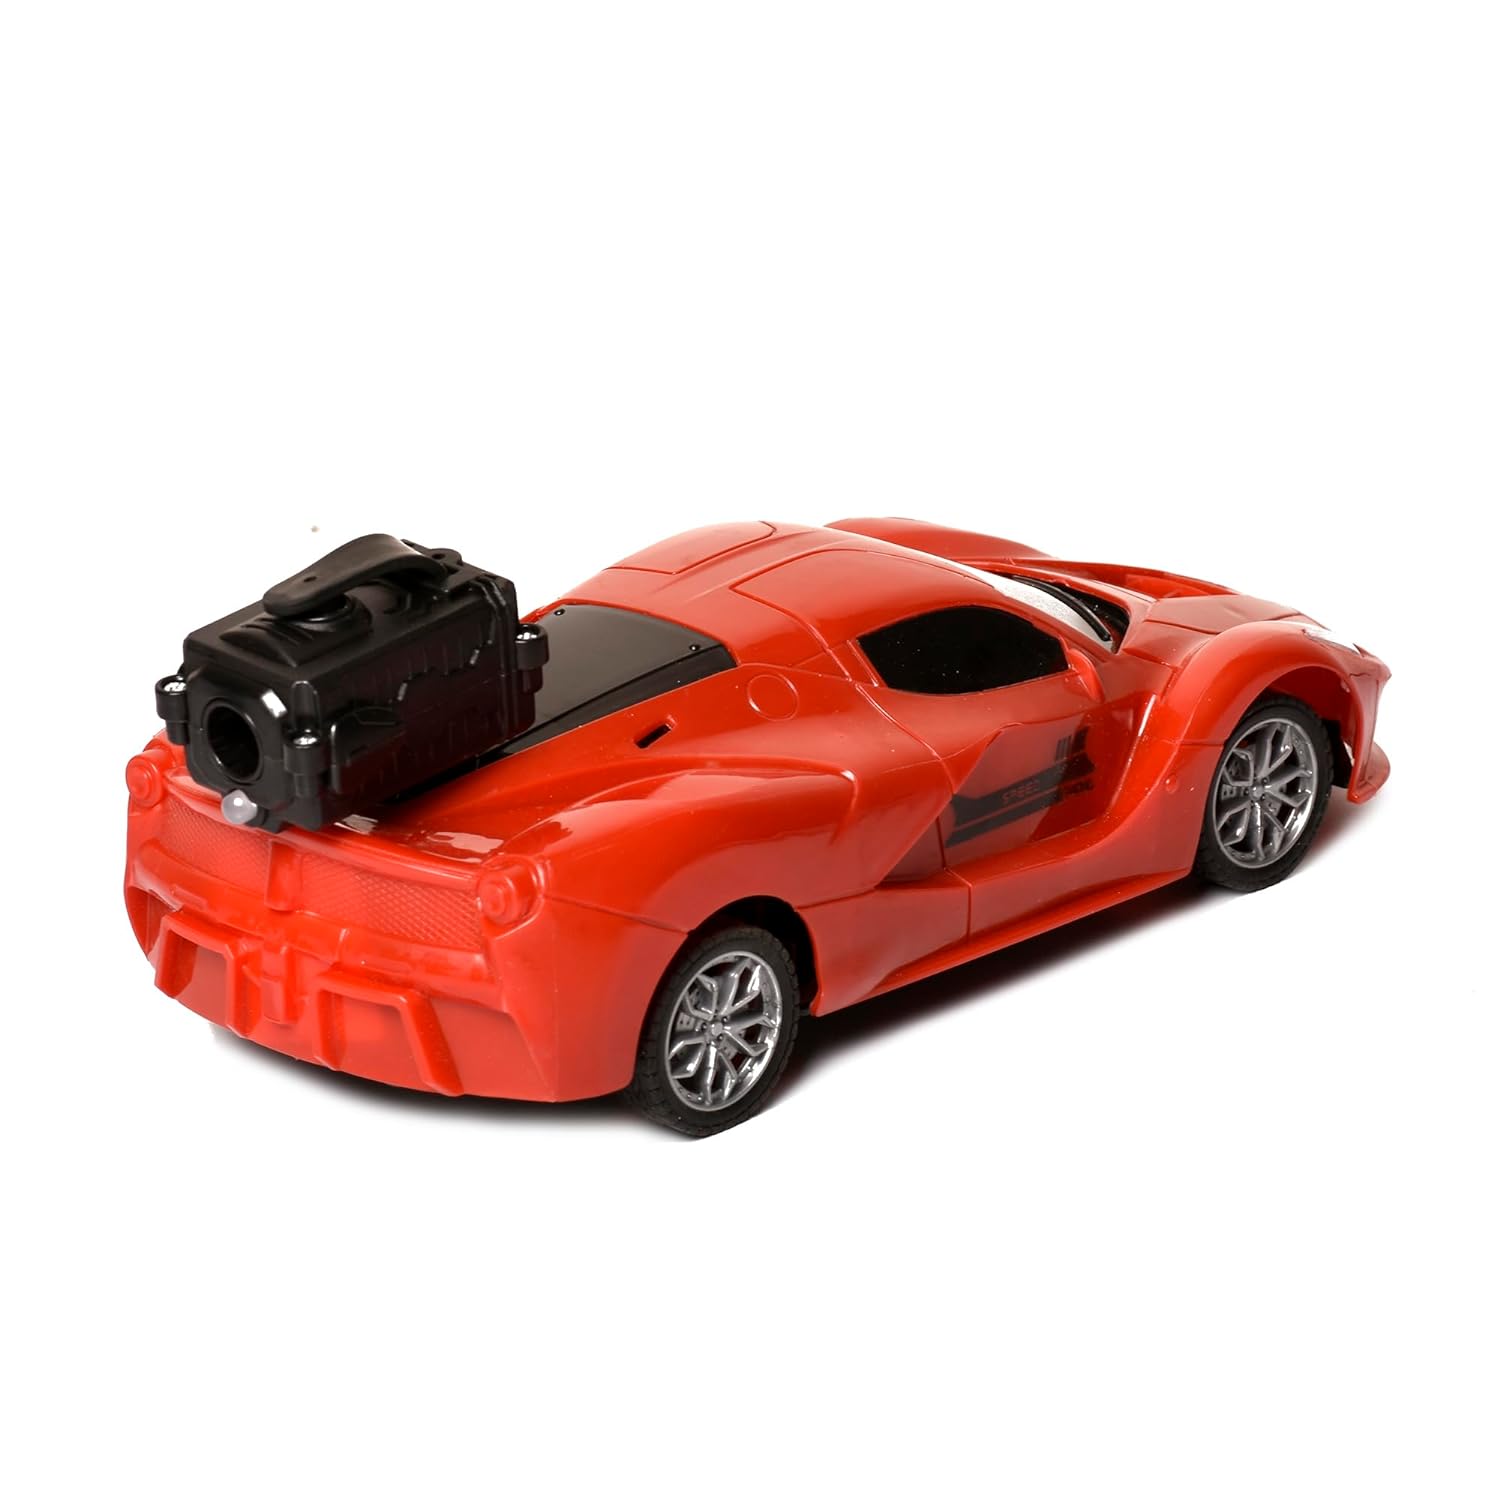 Braintastic Model Diecast Car Toy Vehicle Pull Back Friction Car with Openable Doors Light & Music Toys for Kids Age 3+ Years (Spray Car Red)